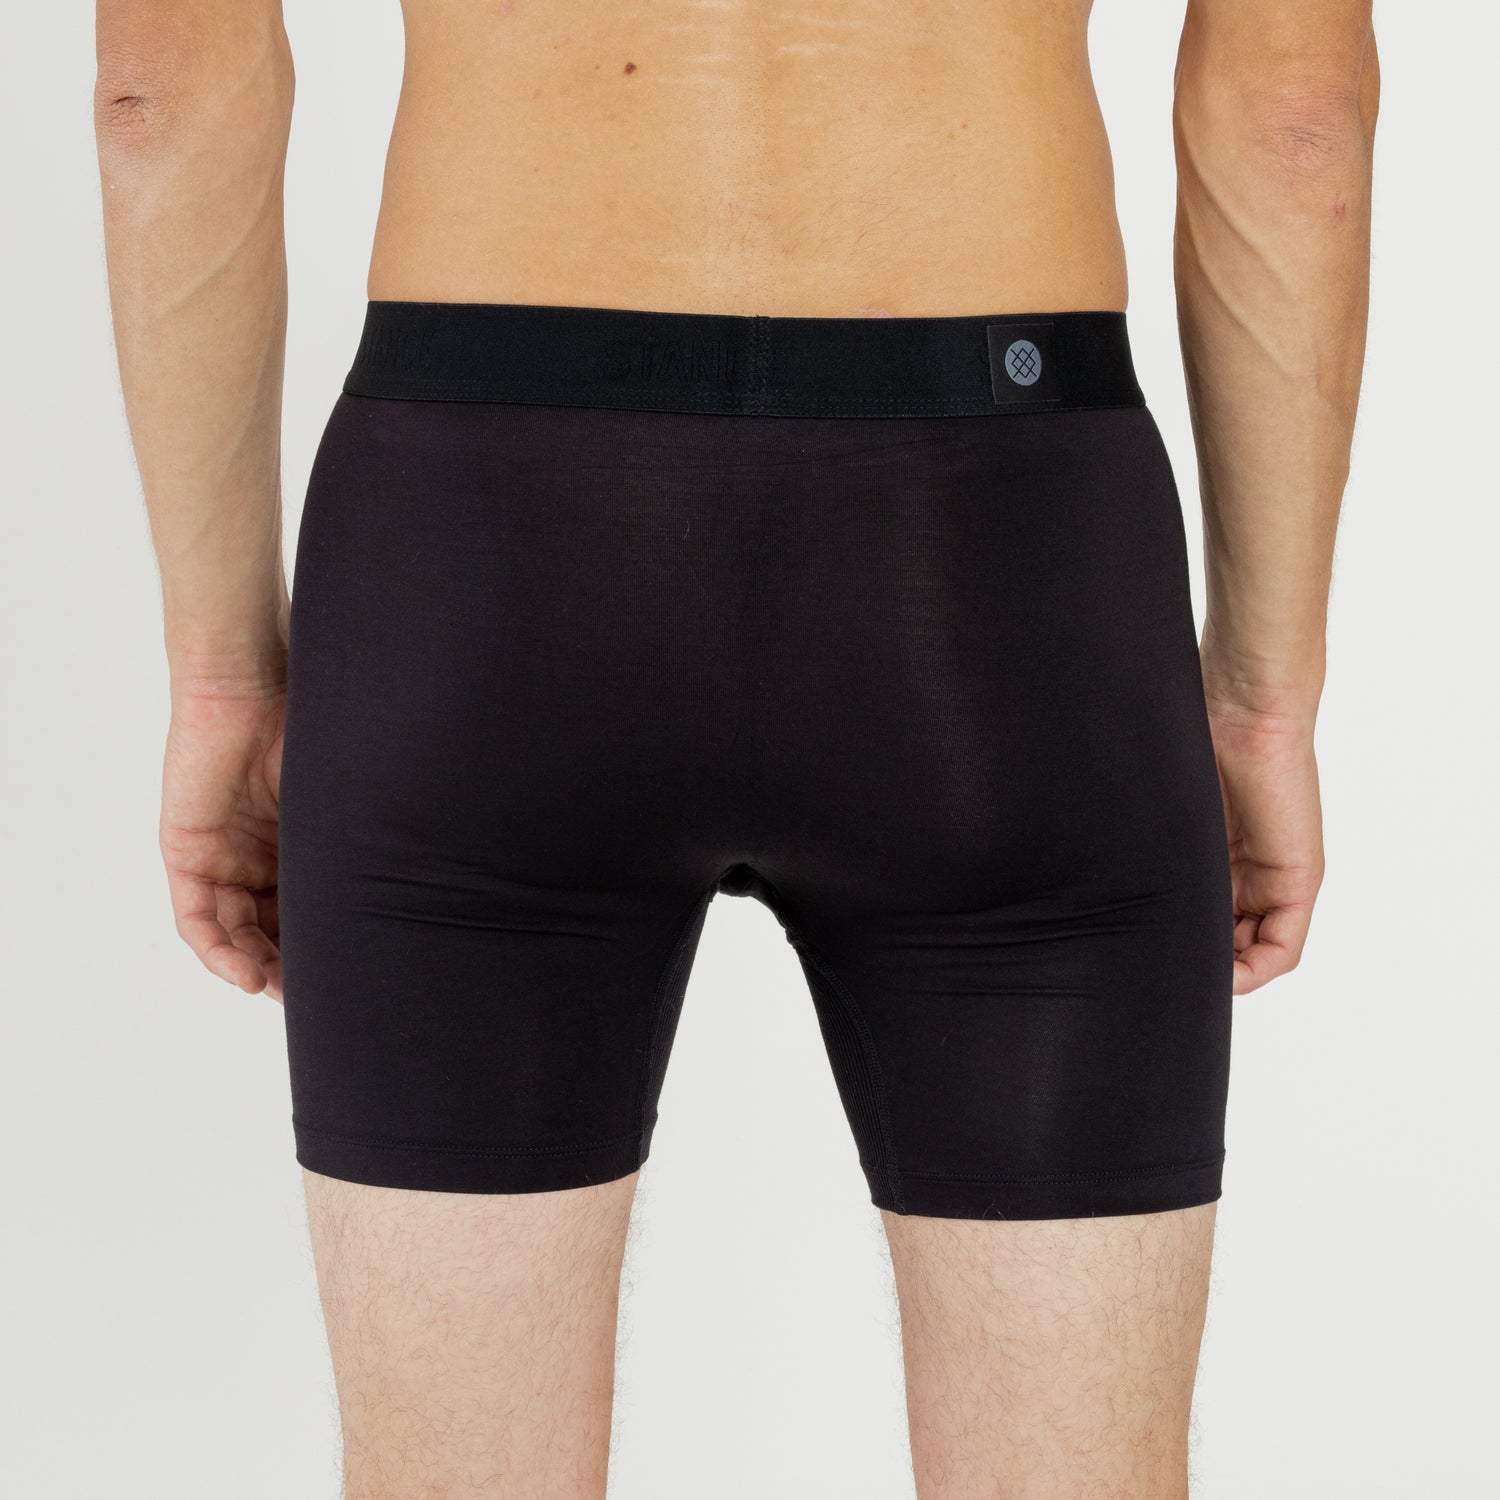 Stance Hunger Boxer Brief